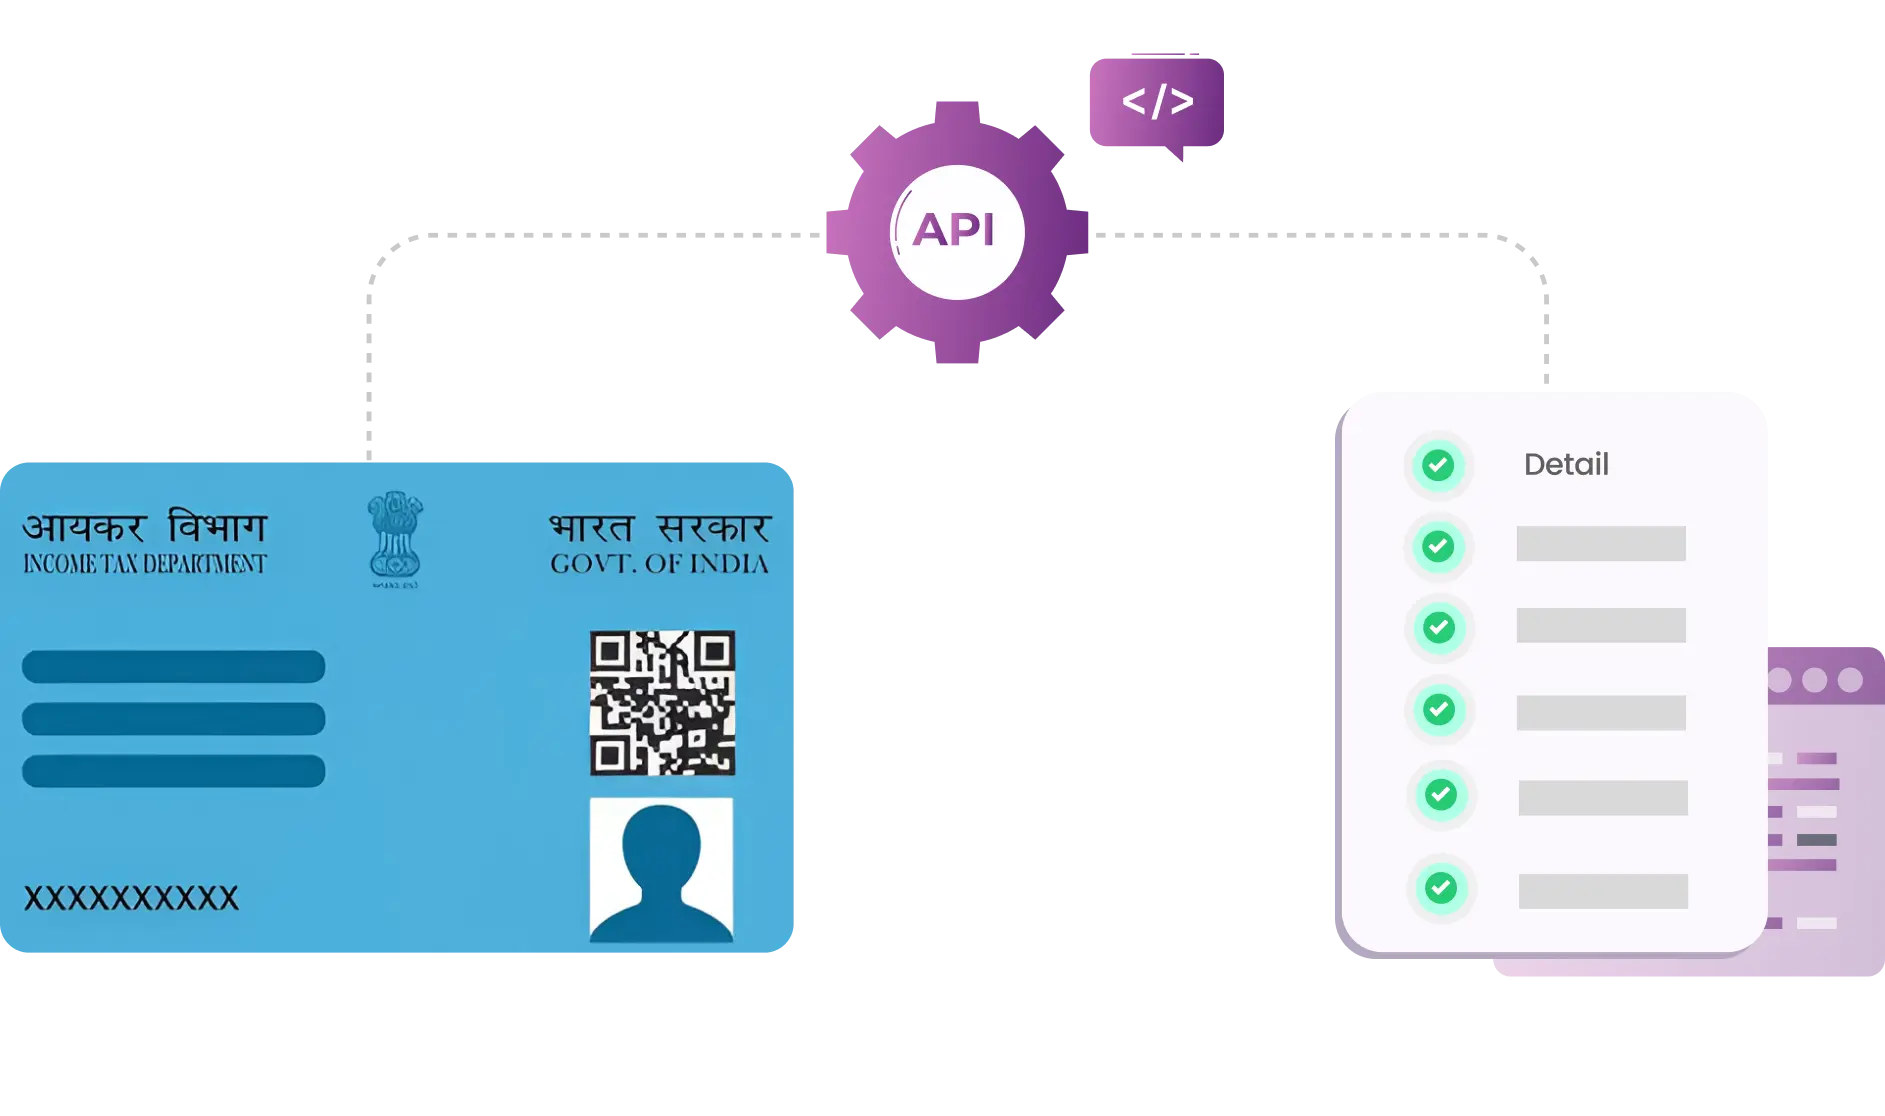 An Indian ID card with its data being processed by an API, leading to a detailed validation checklist marked with green checkmarks.